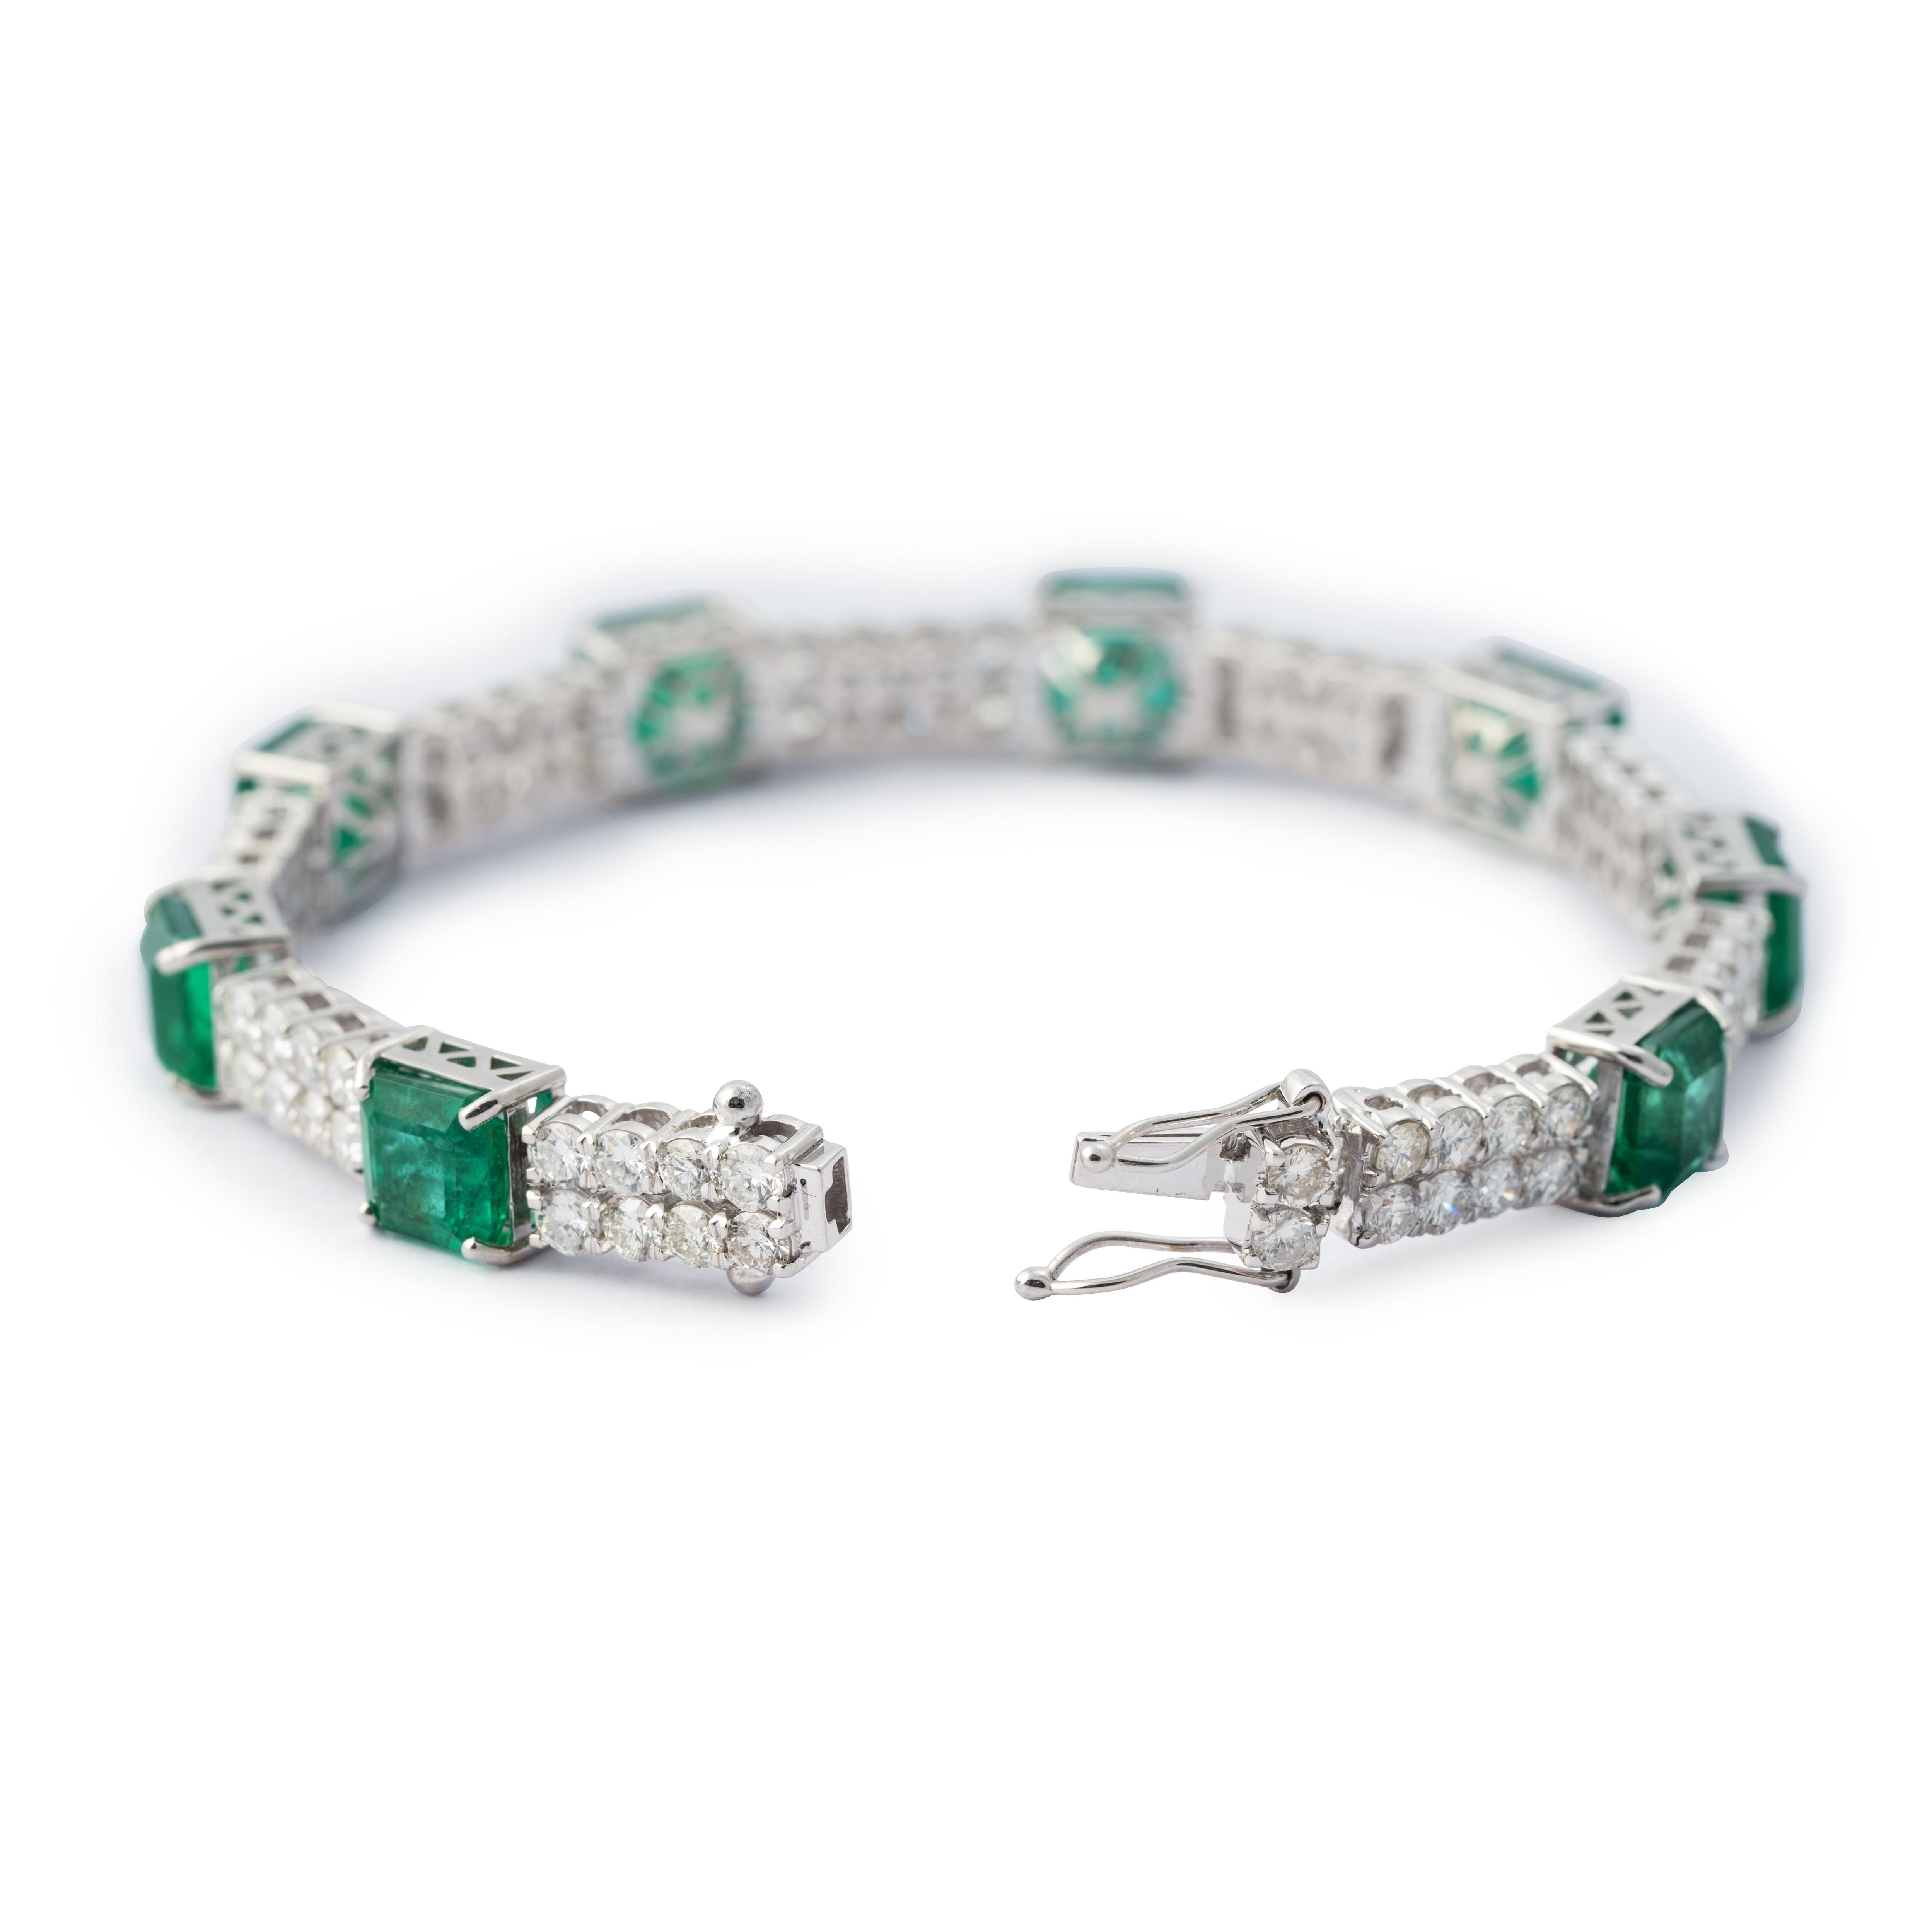 This is a stunning natural Zambian Emerald bracelet which has Emerald of very high quality and diamonds of very good quality . it has vsi clarity and G colour.

Emerald : 14.76 cts
diamonds : 4.74 cts
gold : 14.95 gms

Its very hard to capture the